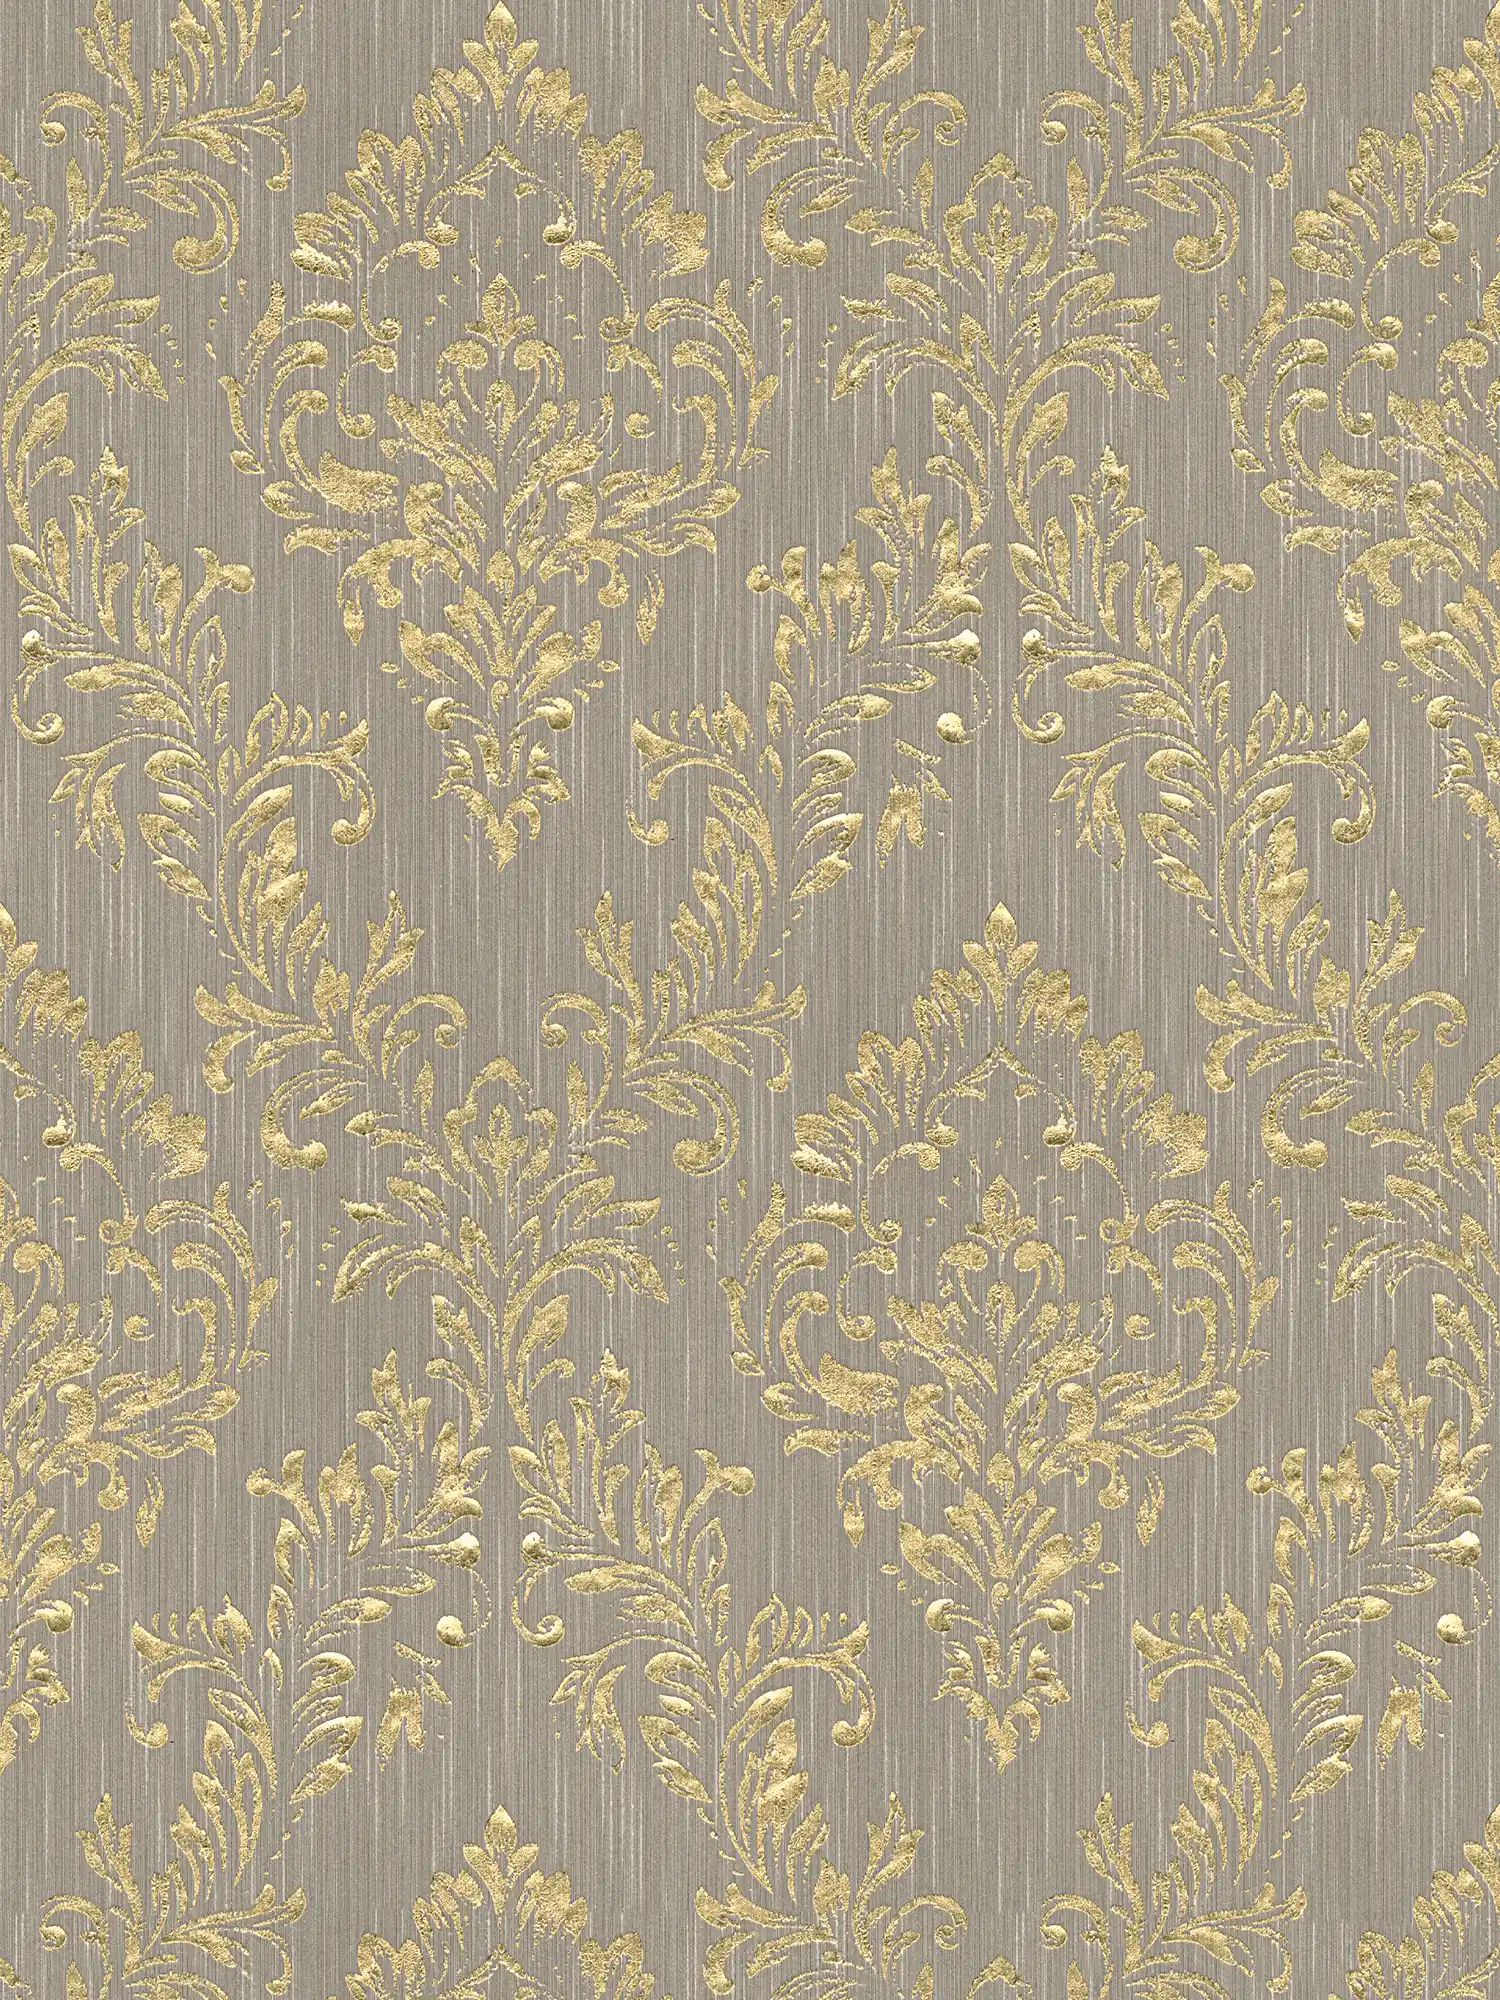 Ornament wallpaper floral with gold glitter effect - gold, beige
